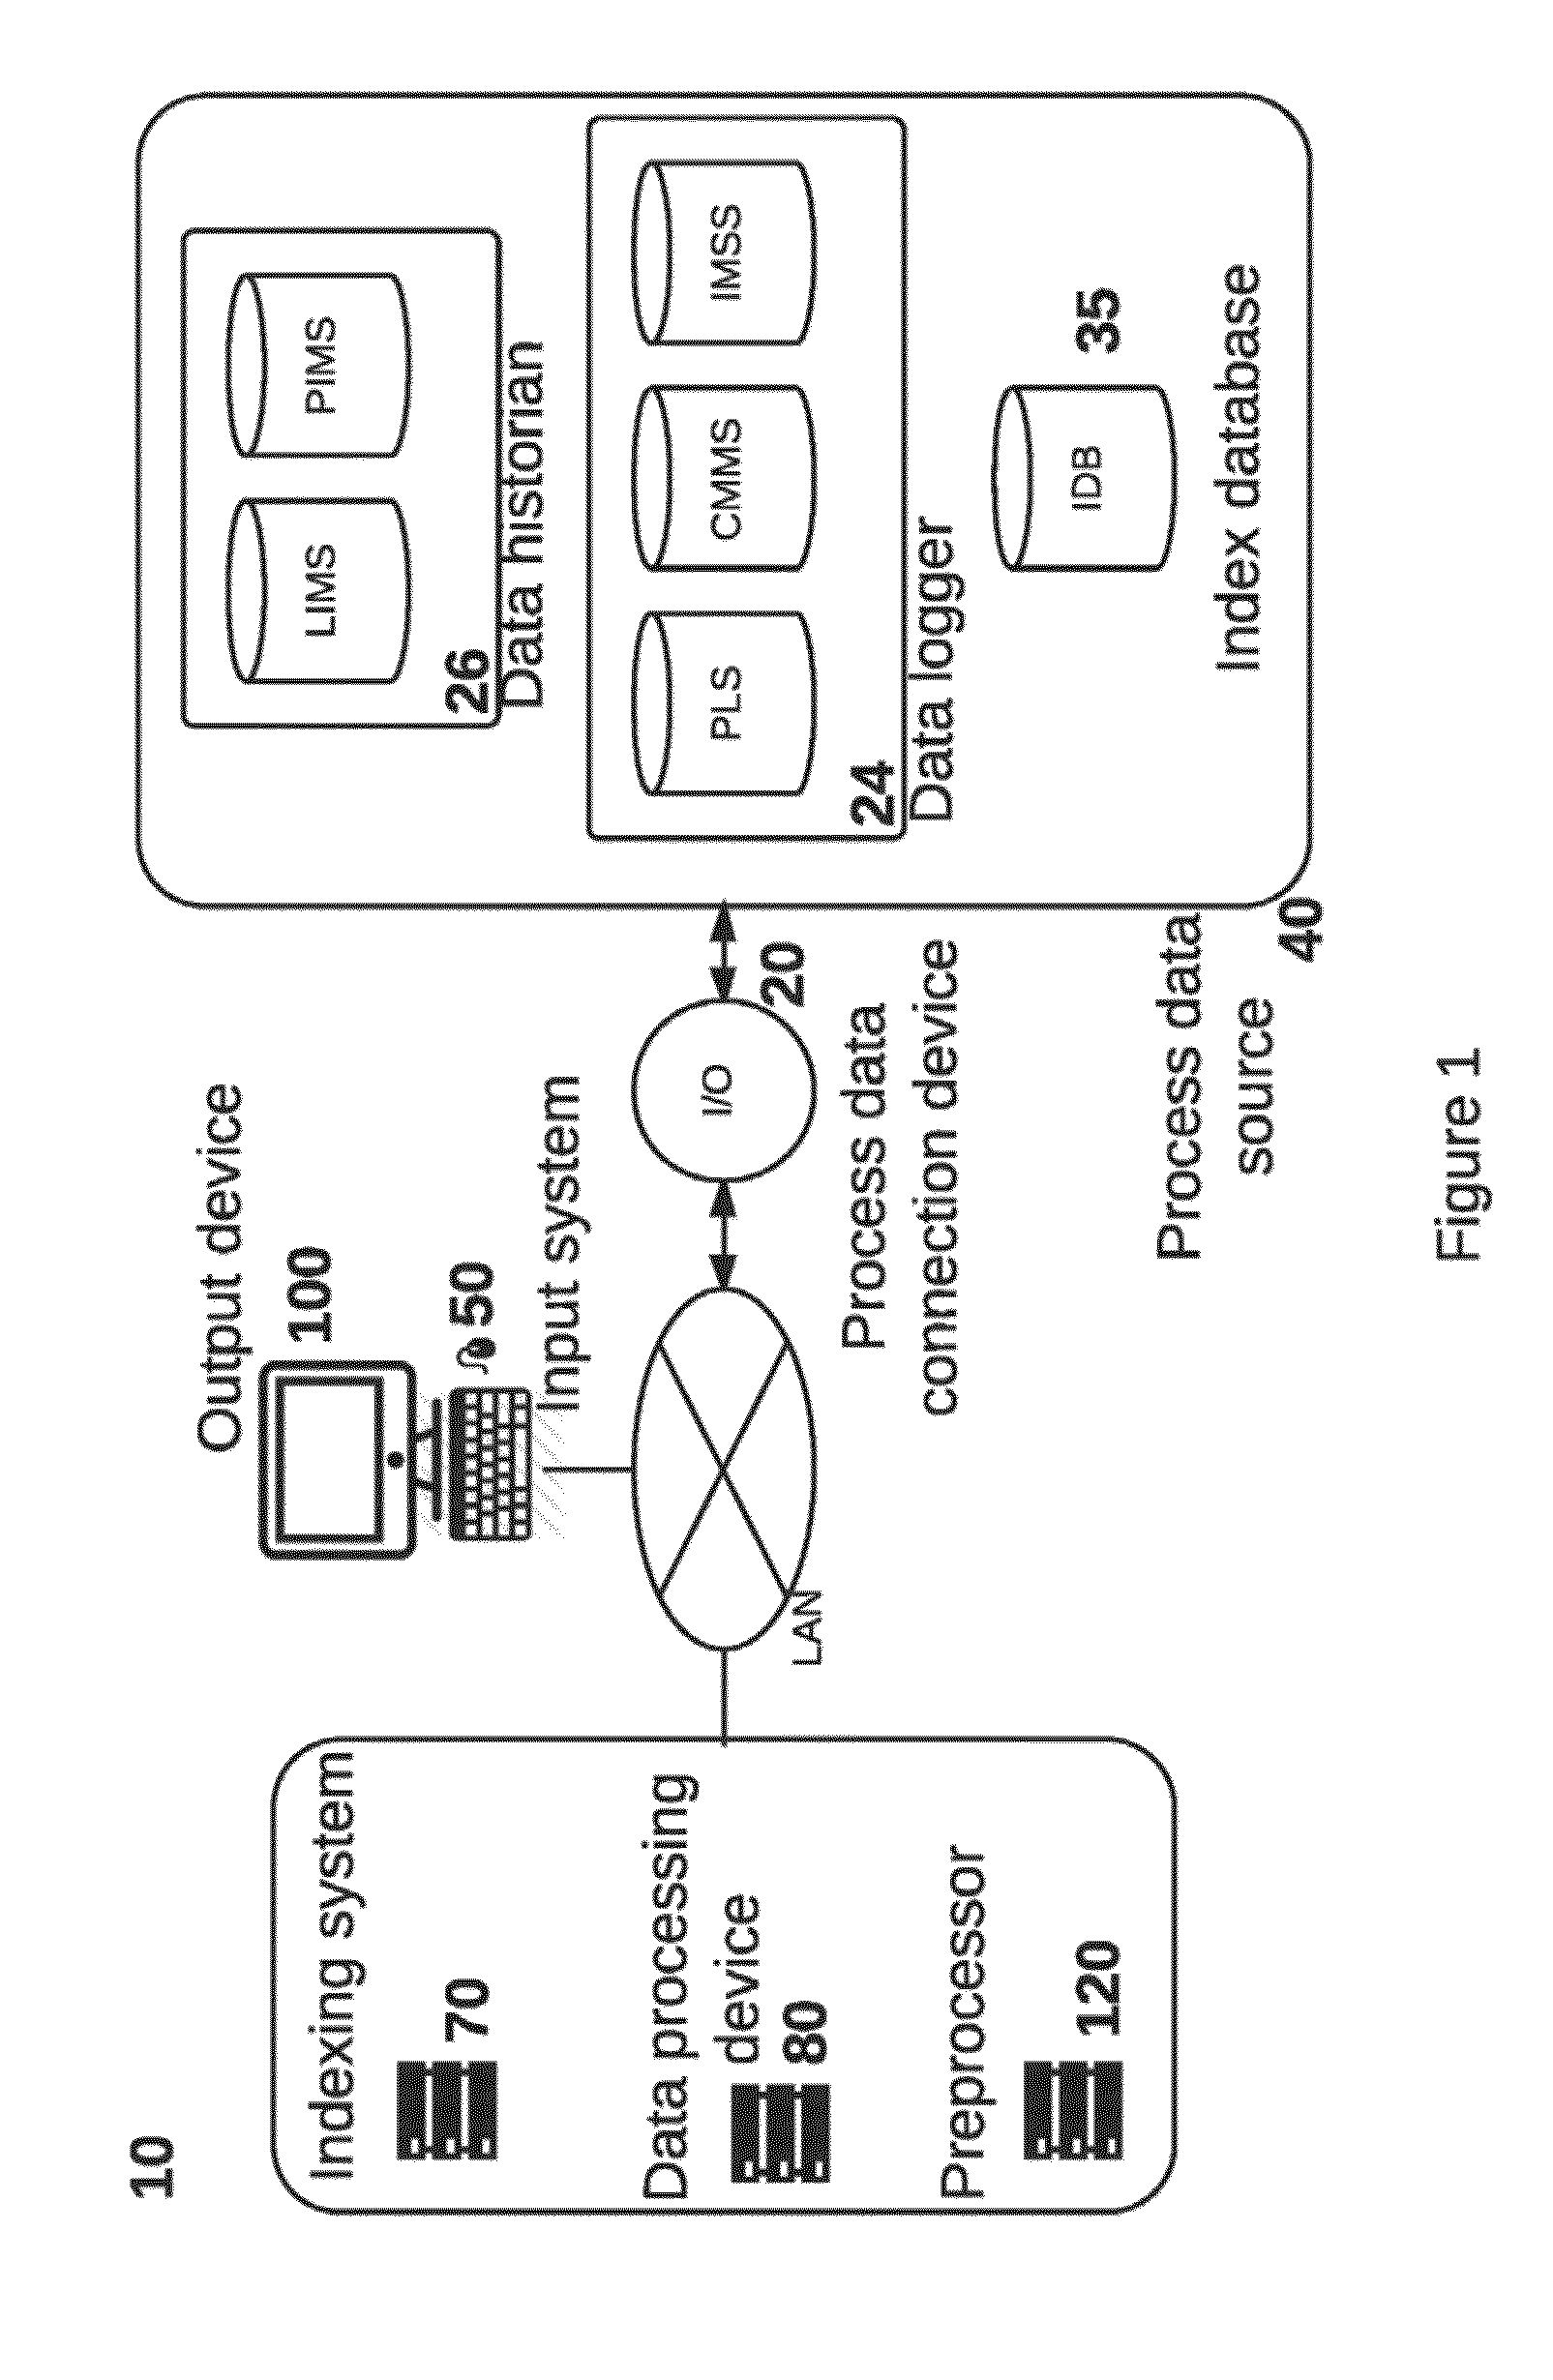 System and Method for Similarity Search in Process Data